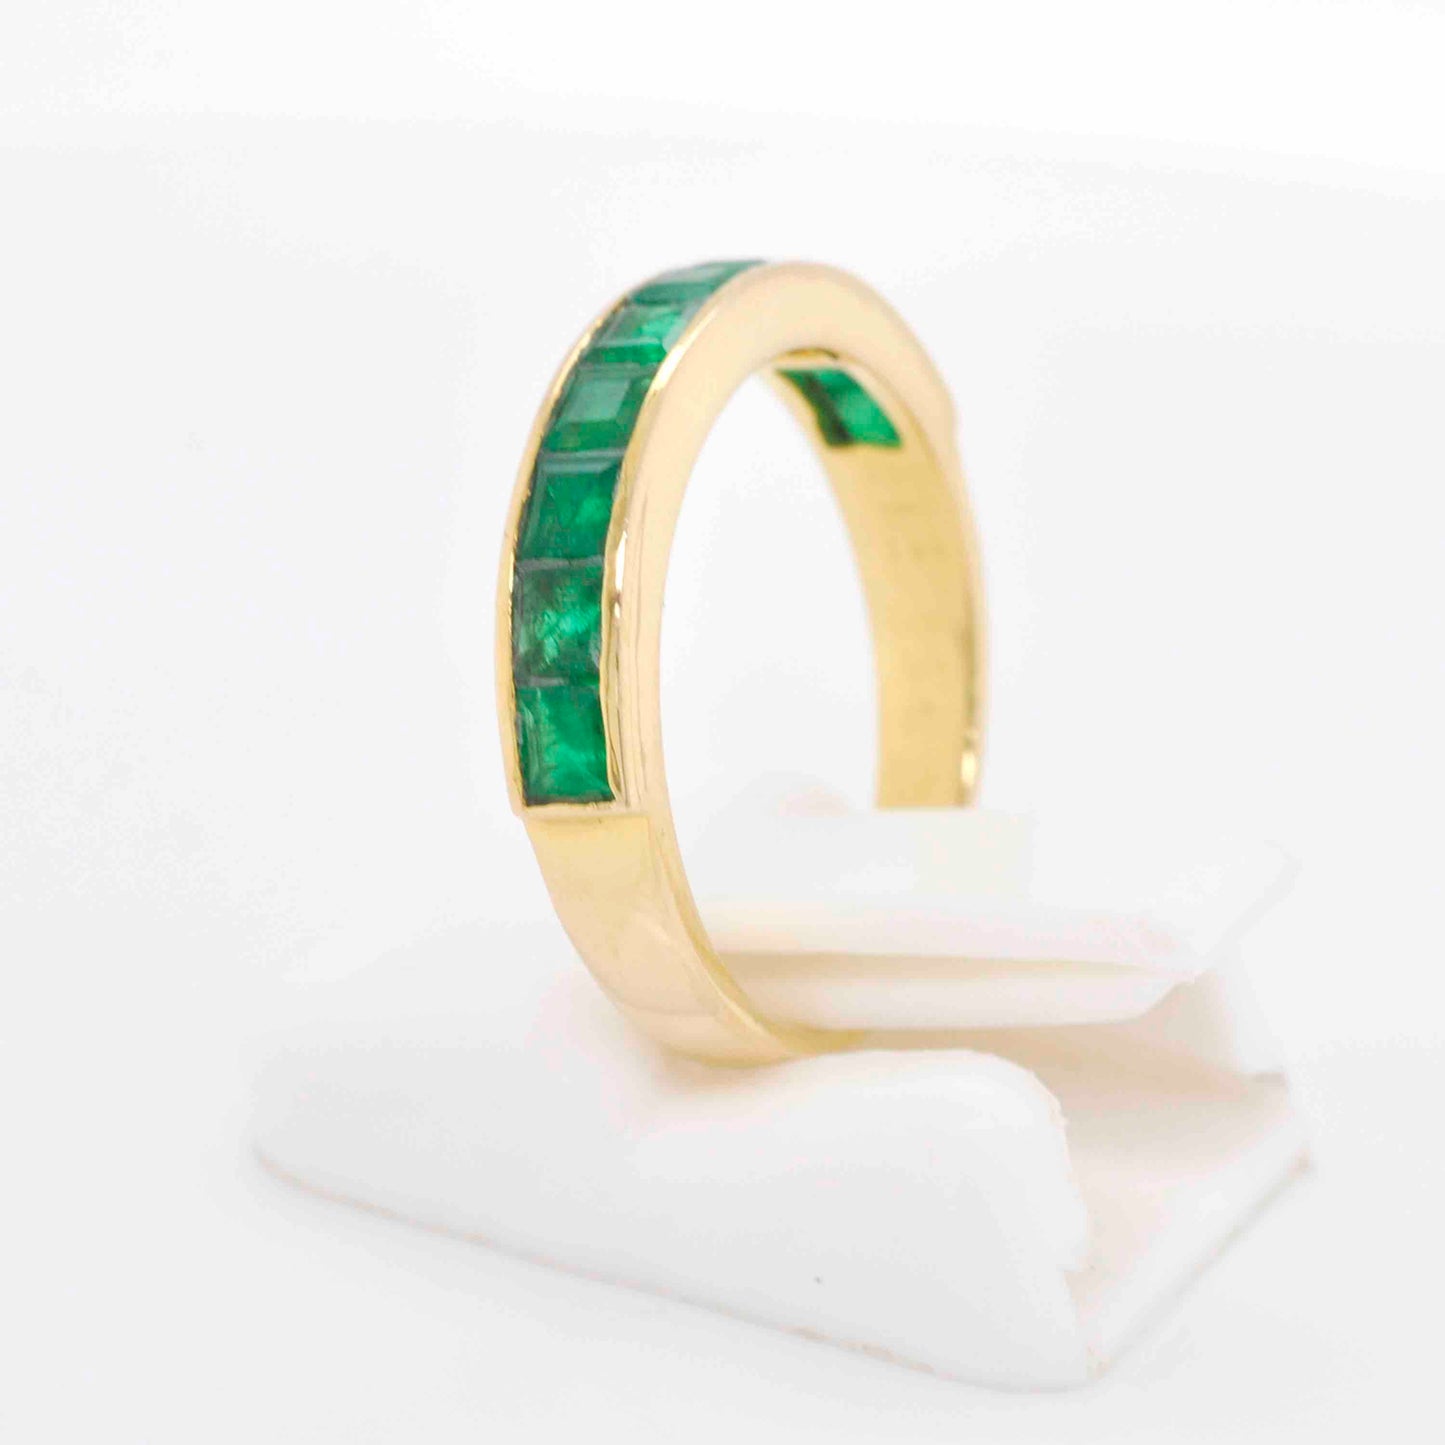 antique green gemstone rings in yellow gold